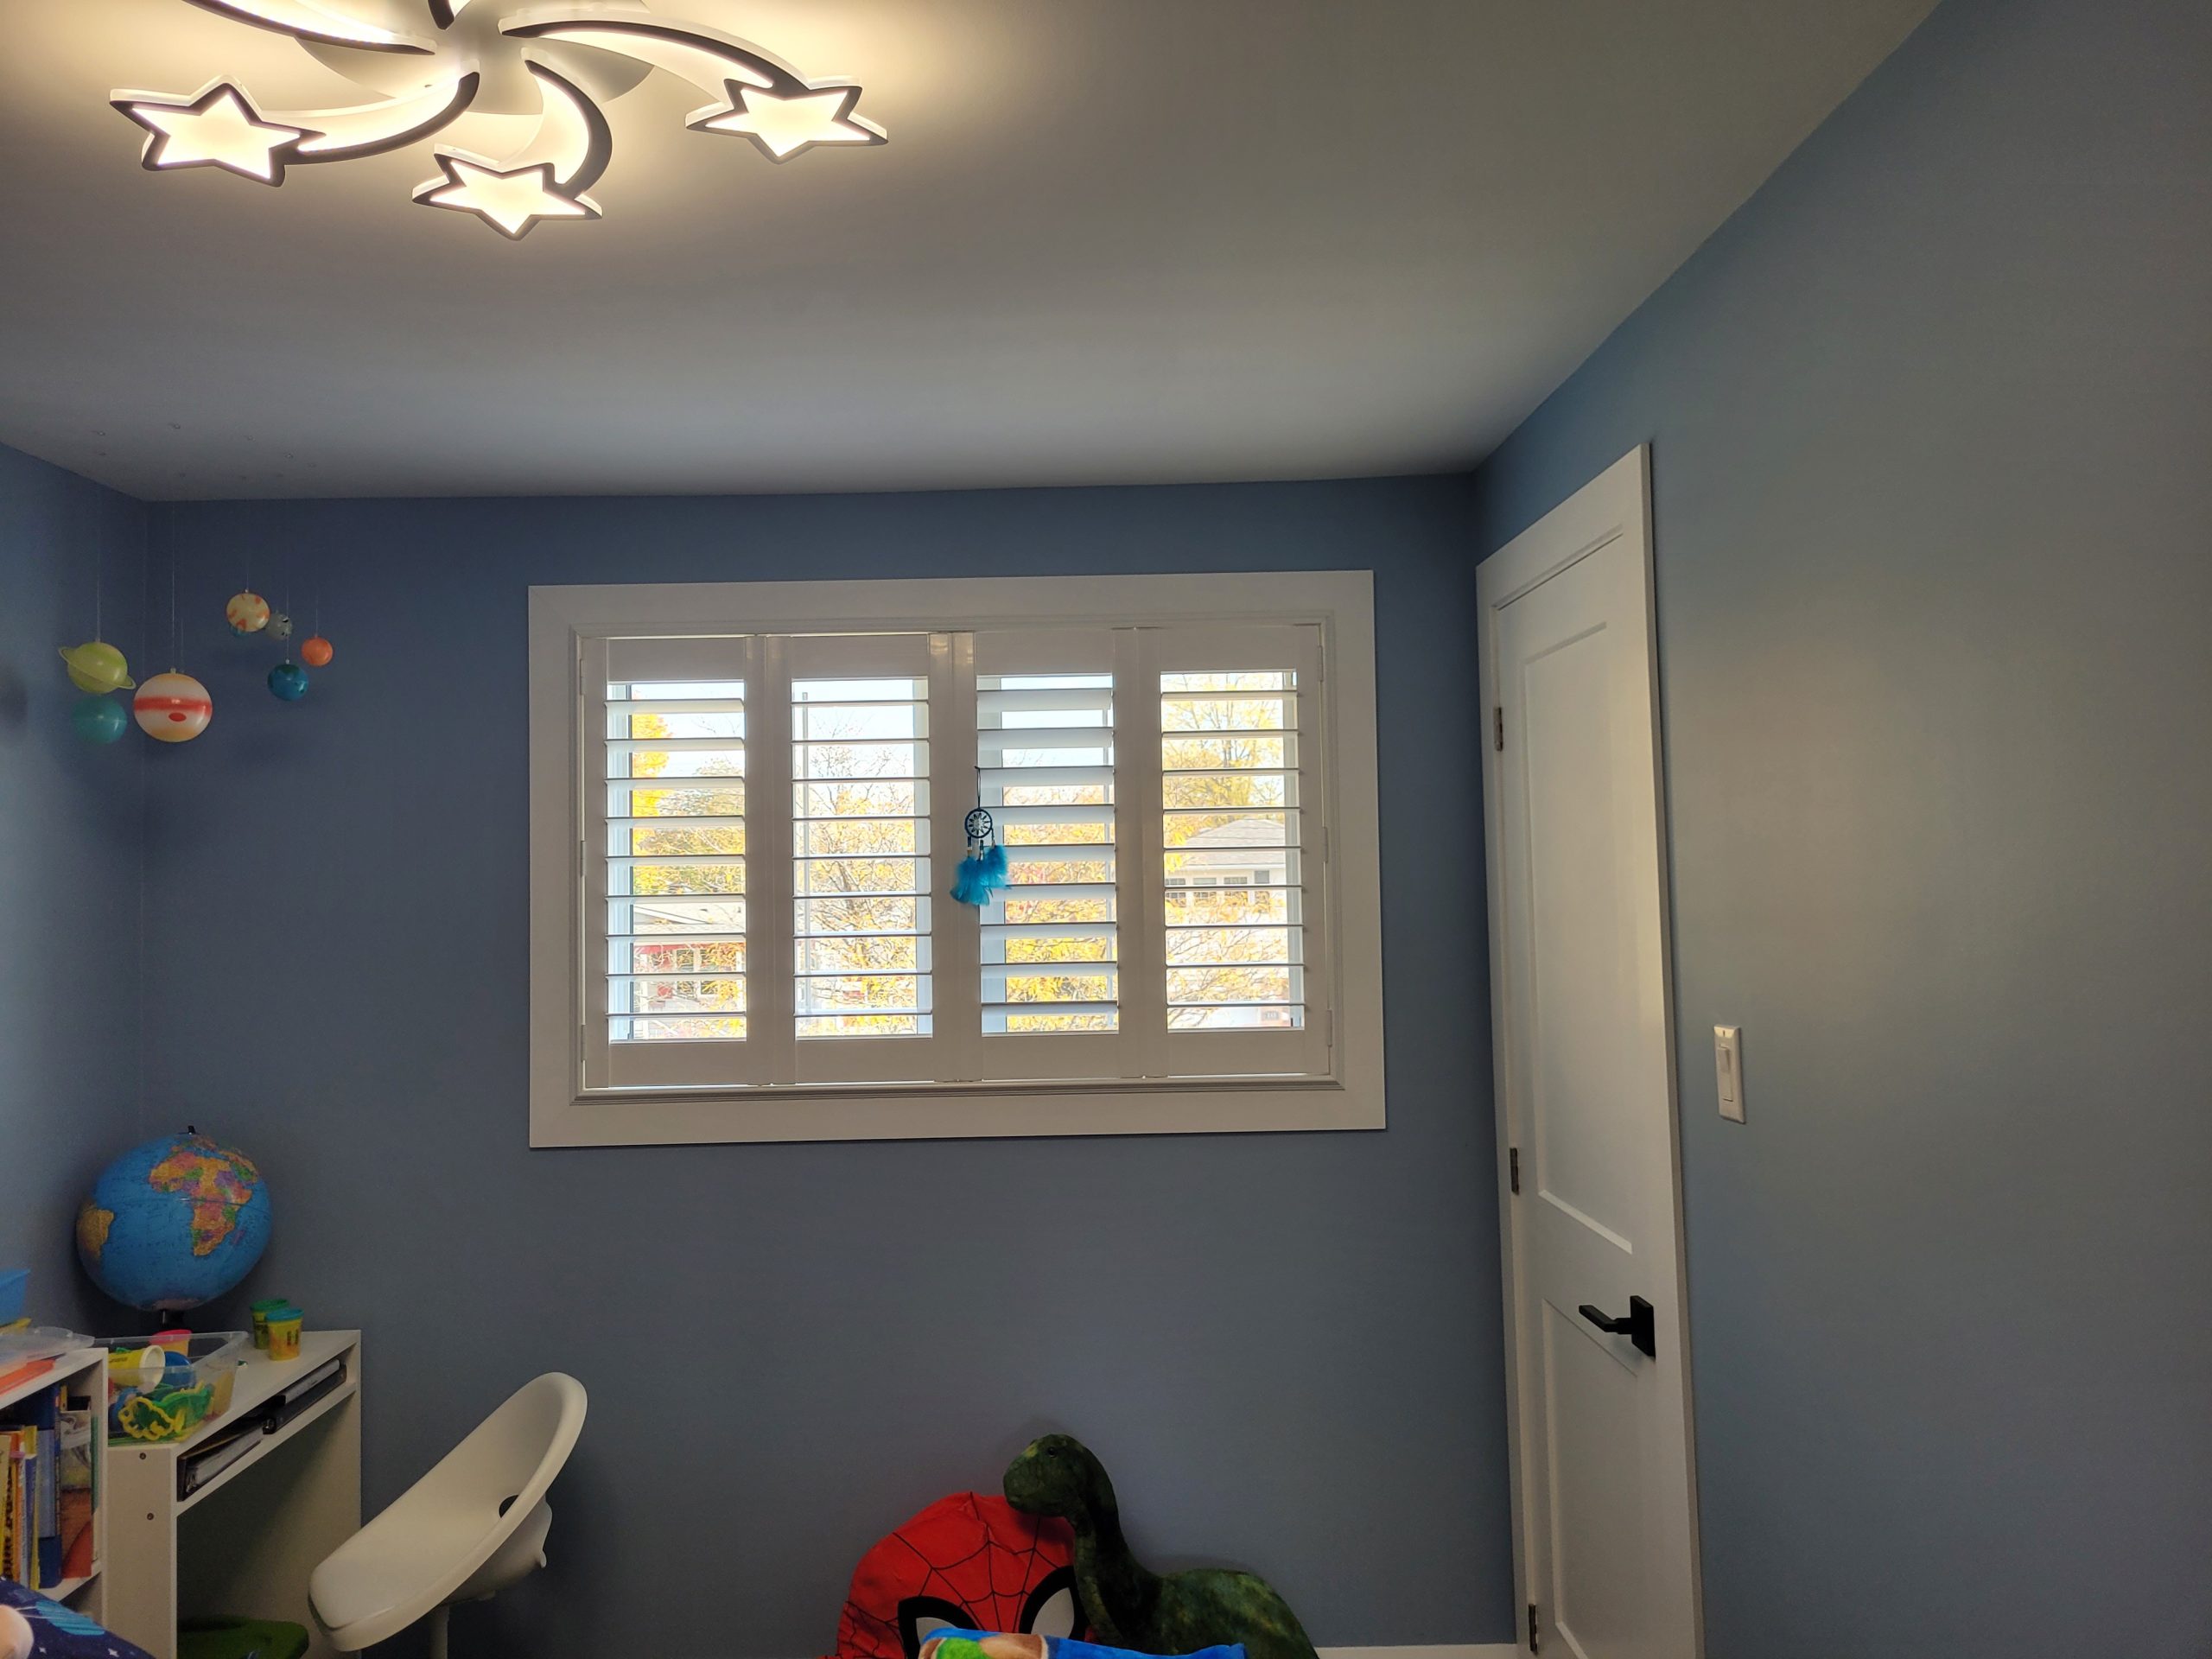 PLANTATION SHUTTERS AND CURTAINS FOR WINDOW TREATMENTS